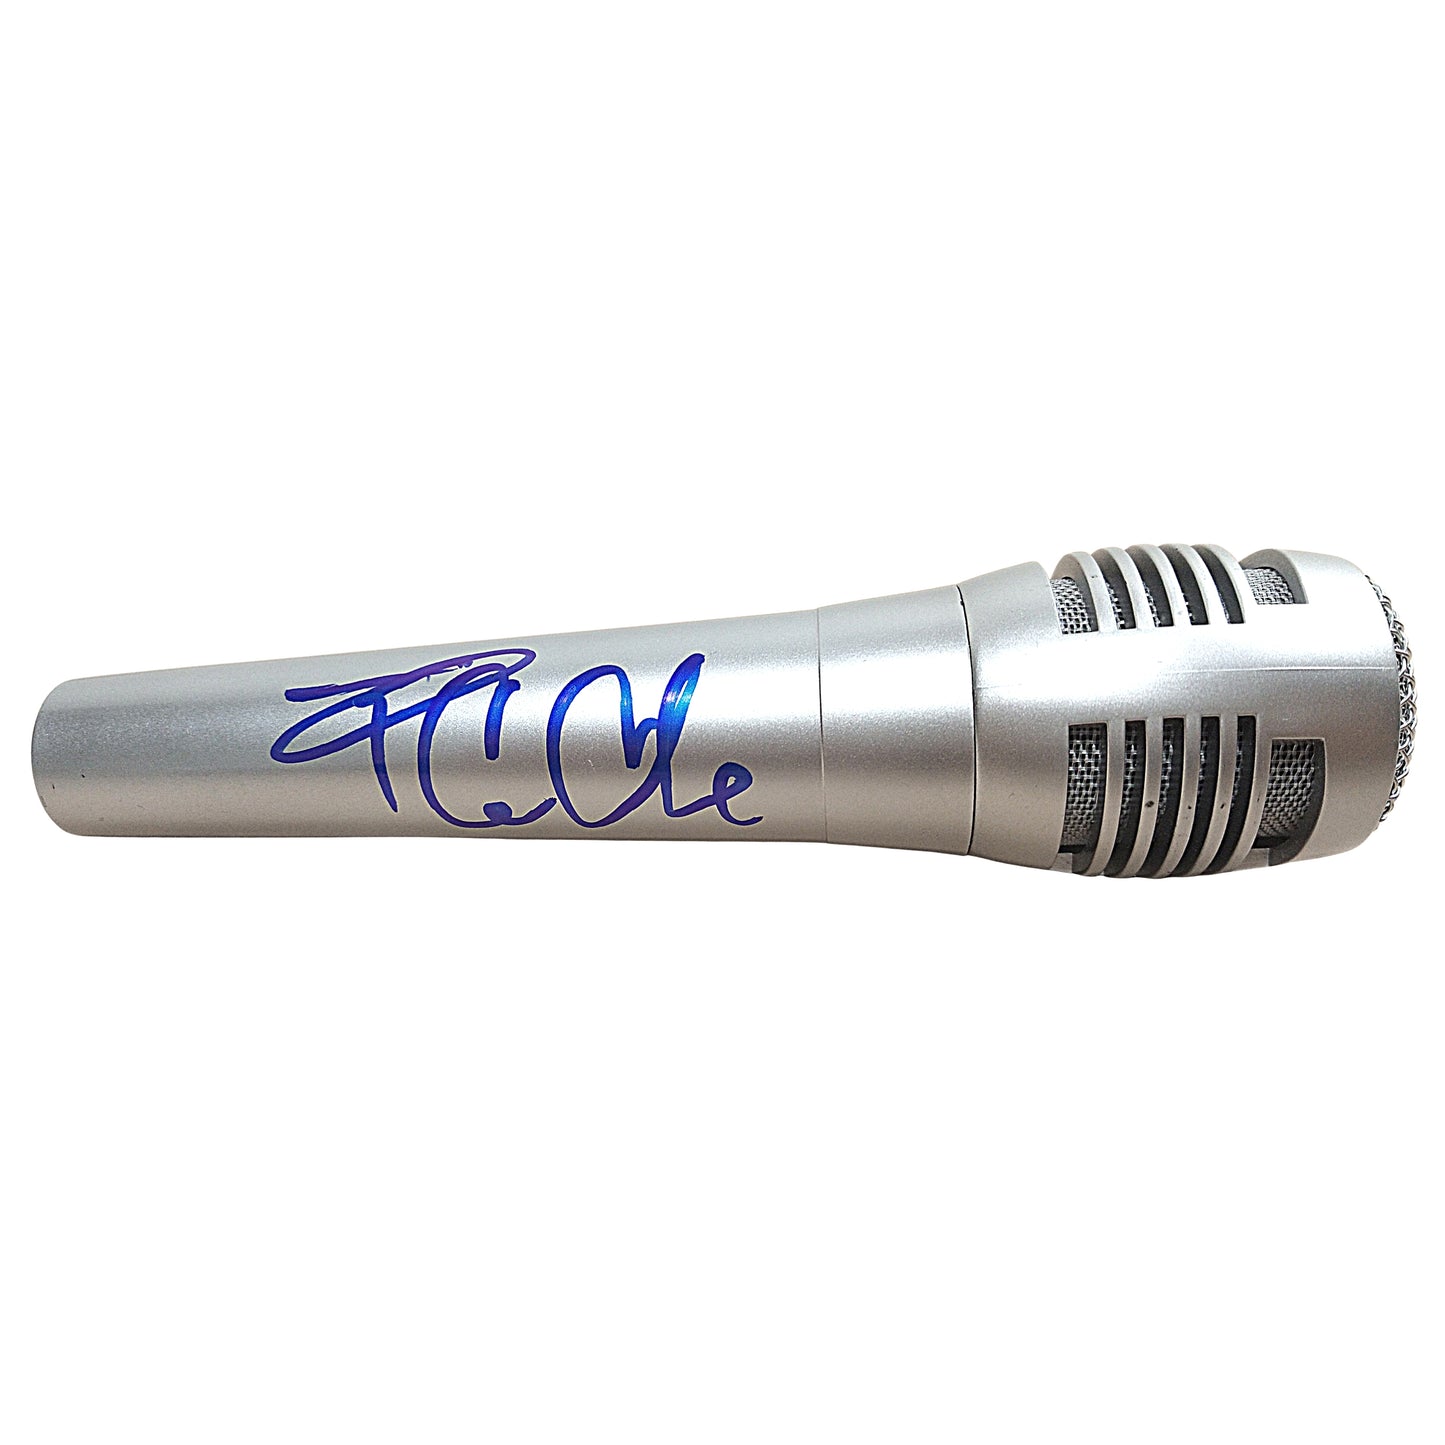 Music- Autographed- Ice Cube Signed Microphone NWA Rap Legend Exact Proof Photo Beckett Authentication 202